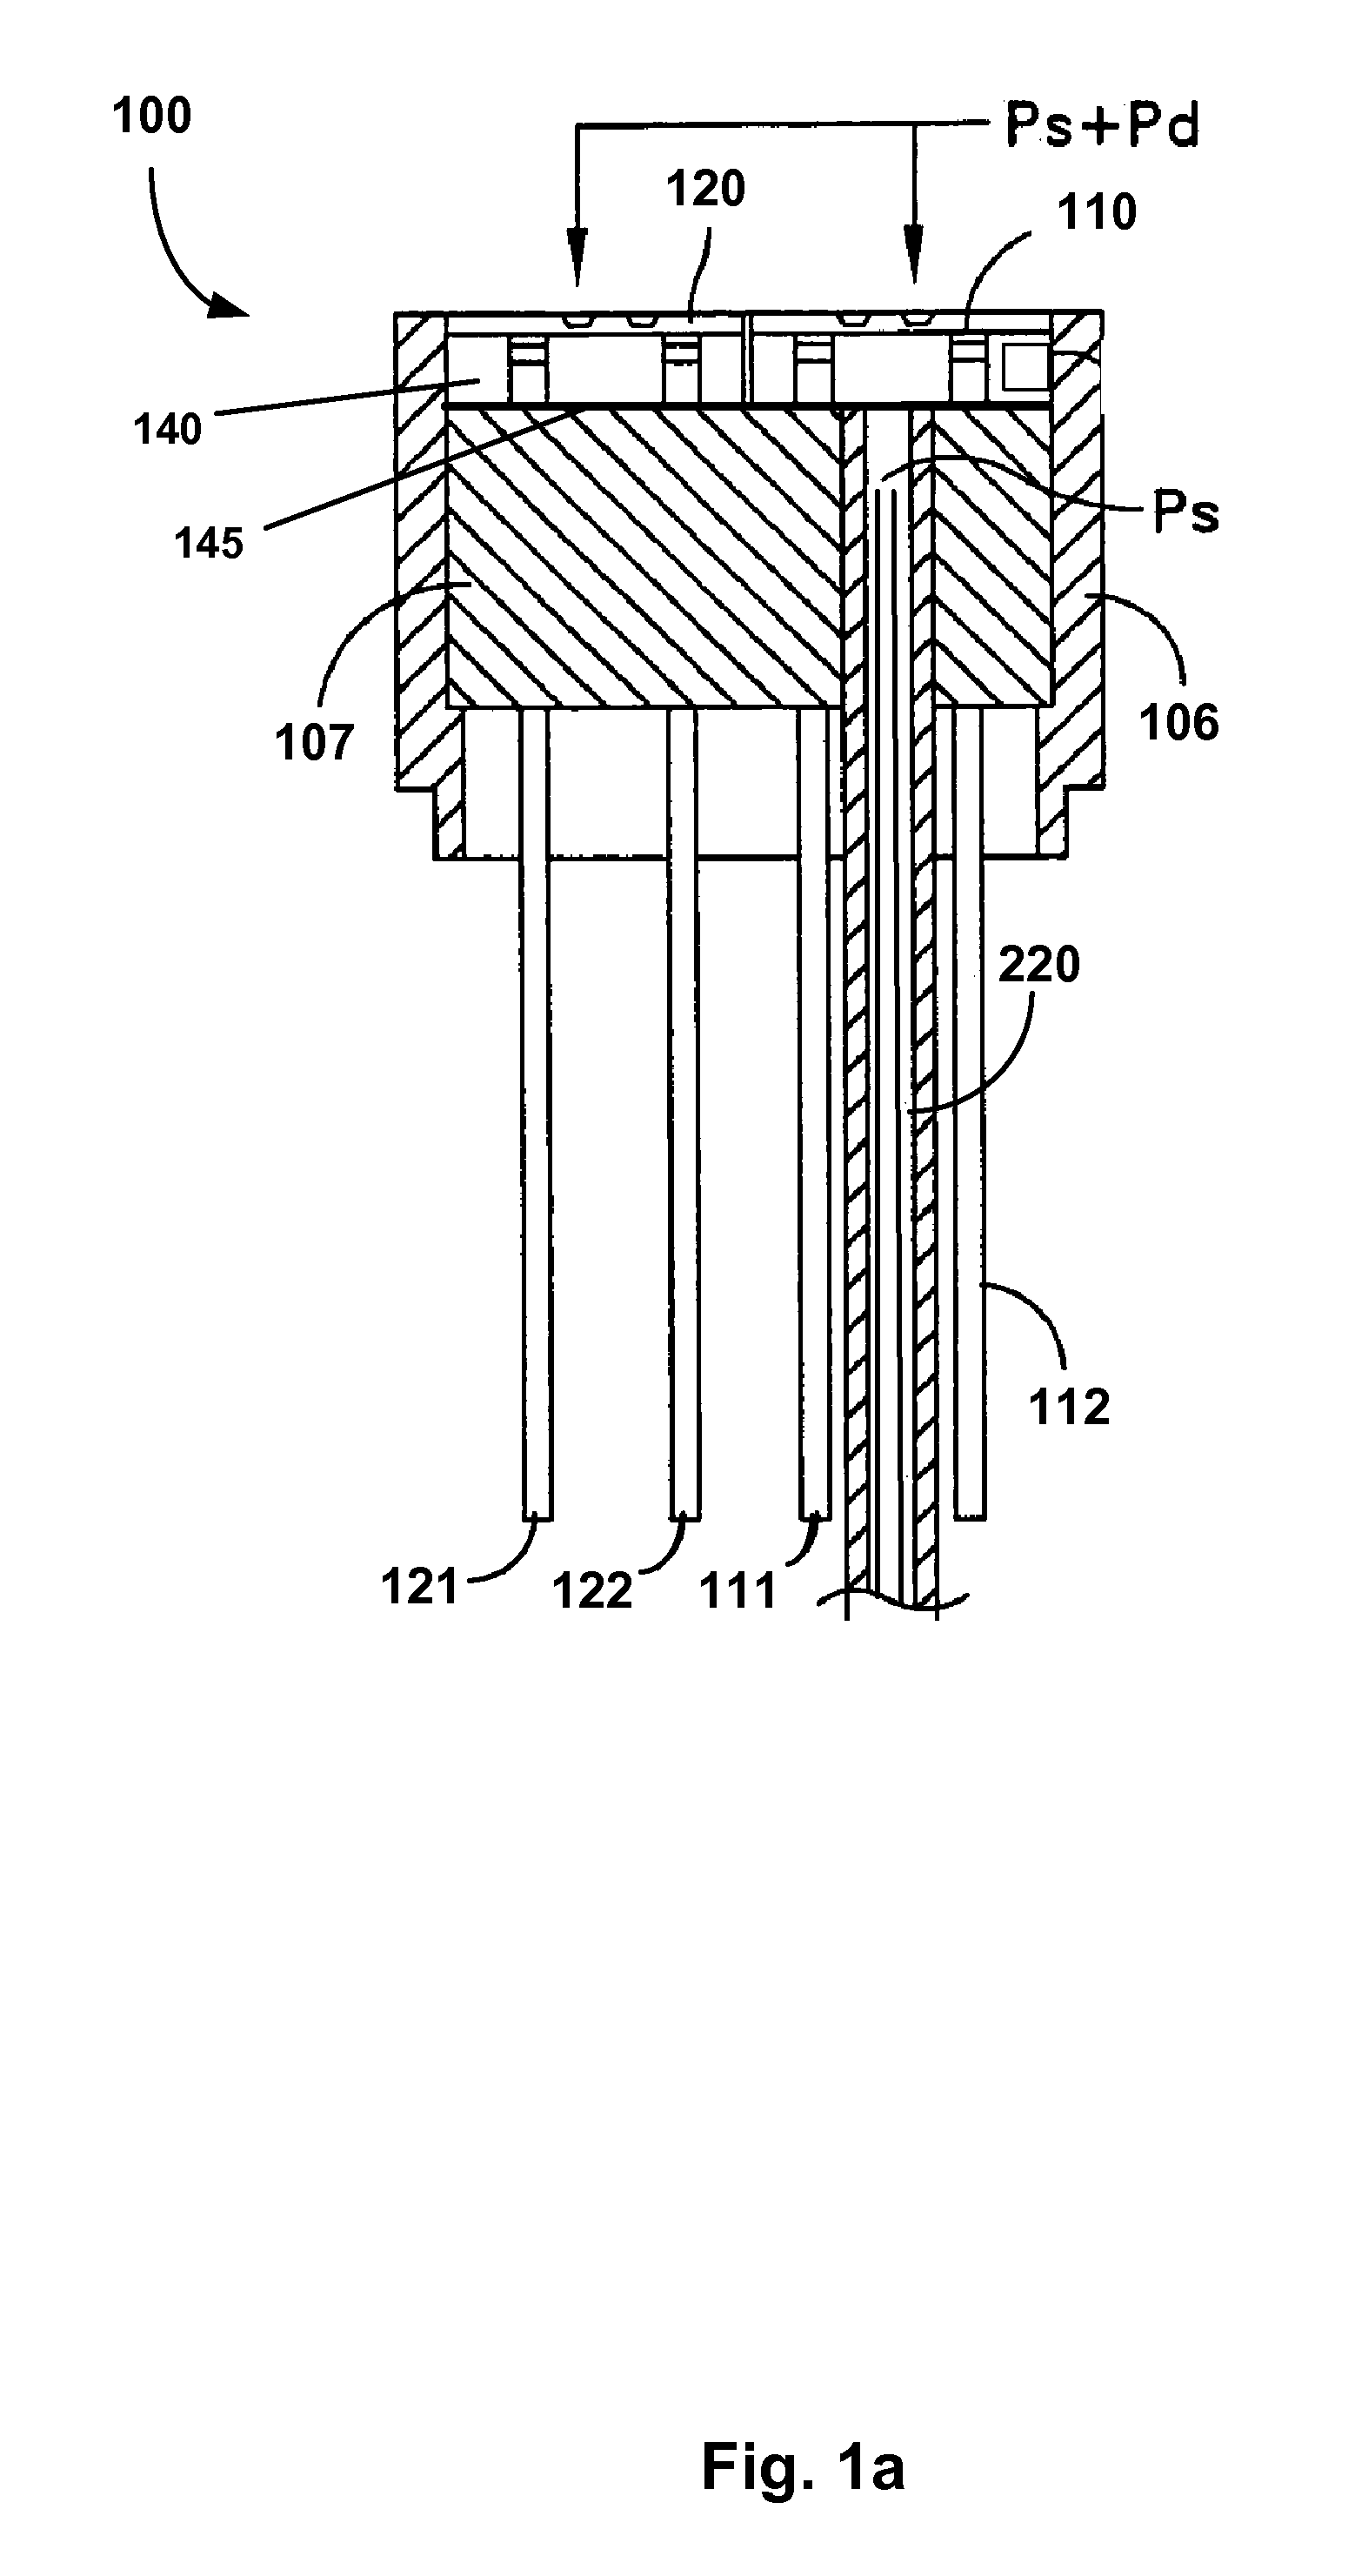 Enhanced static-dynamic pressure transducer suitable for use in gas turbines and other compressor applications